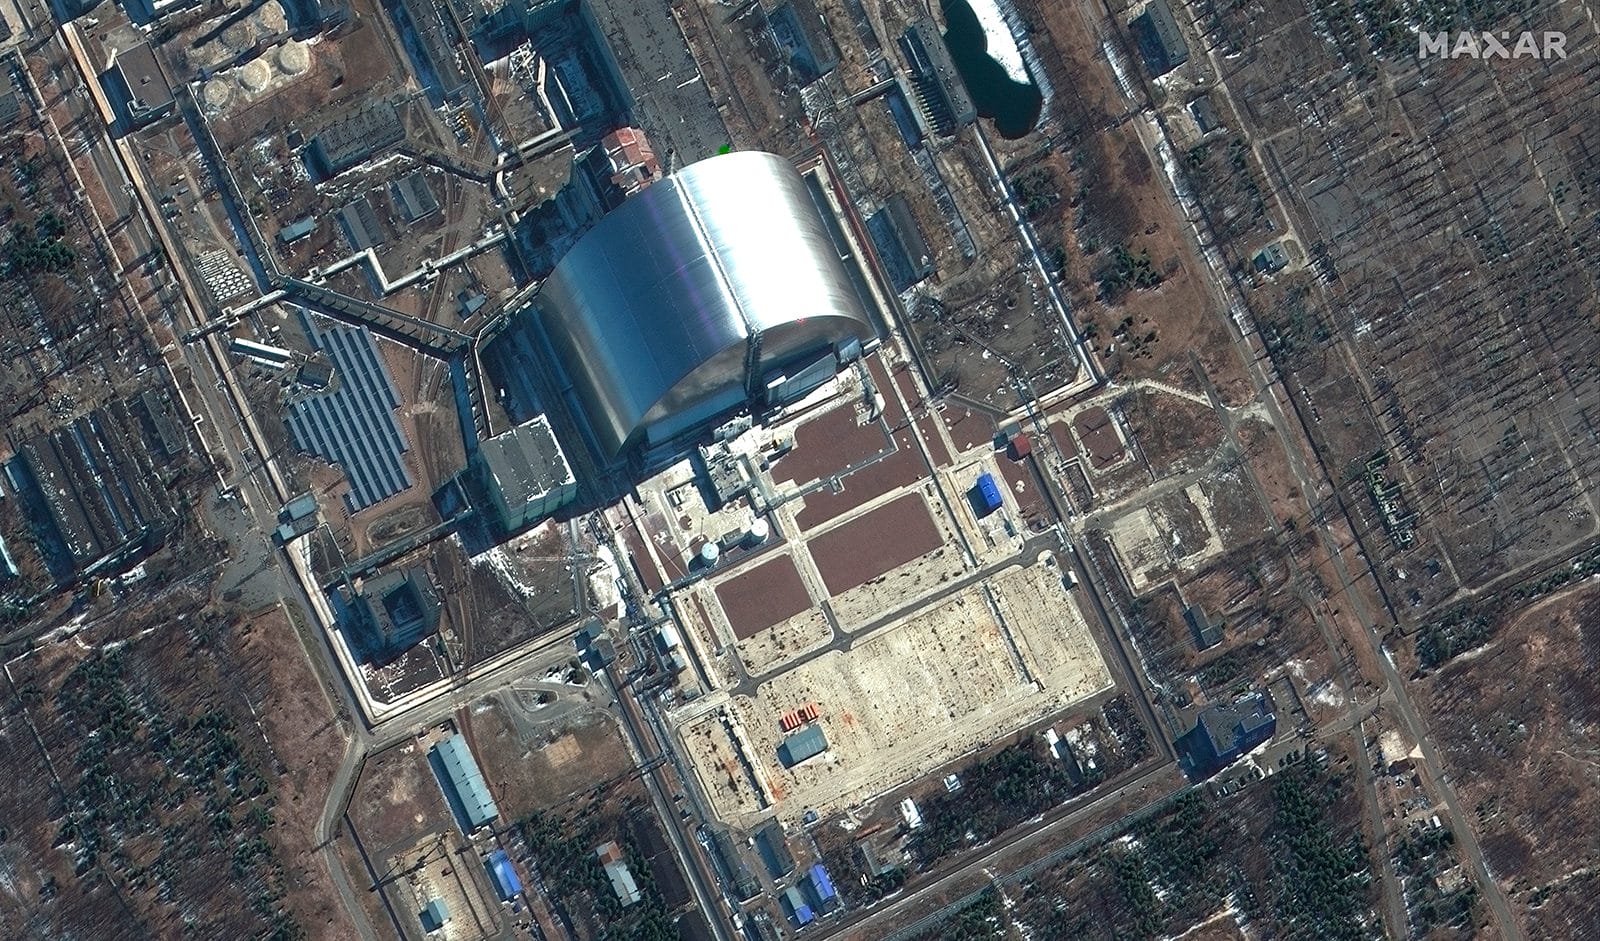 This satellite image provided by Maxar Technologies shows a close-up view of the Chernobyl nuclear facilities, Ukraine, on Thursday, March 10.